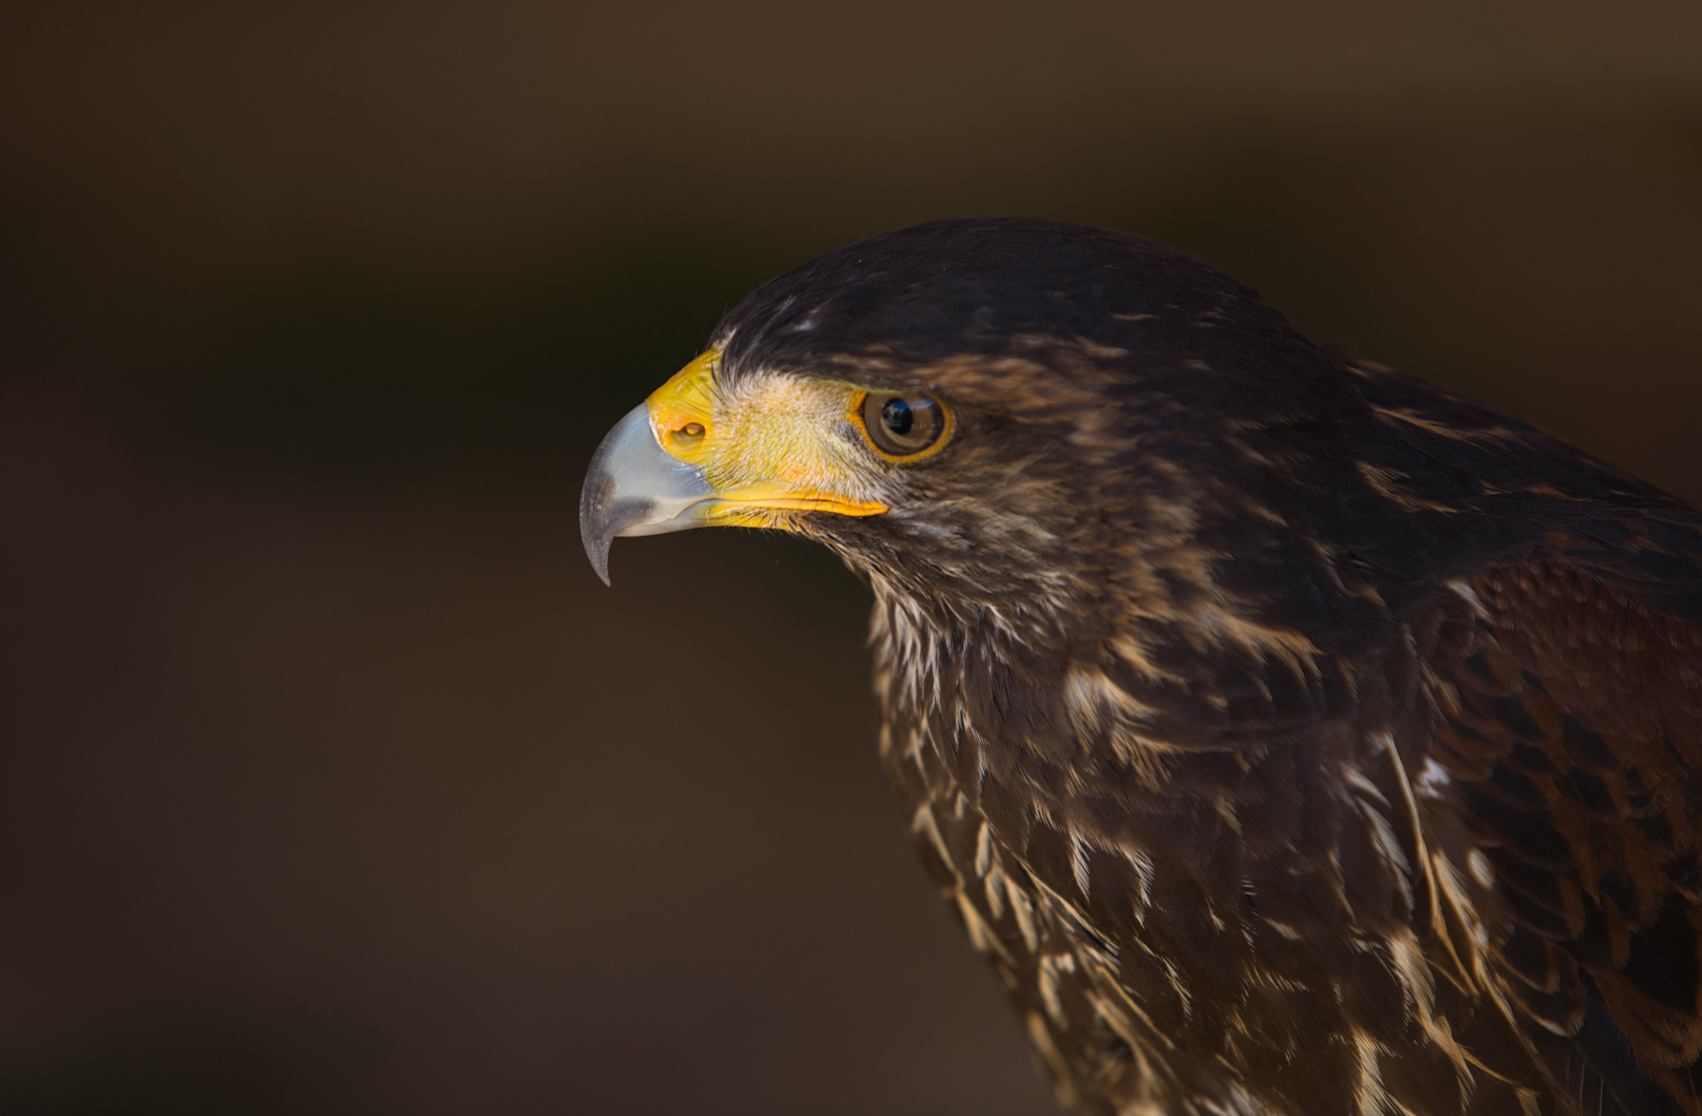 http://www.townandcountryfalconry.co.uk/wp-content/uploads/2016/12/Fotolia_38402187_Subscription_Monthly_M.jpg